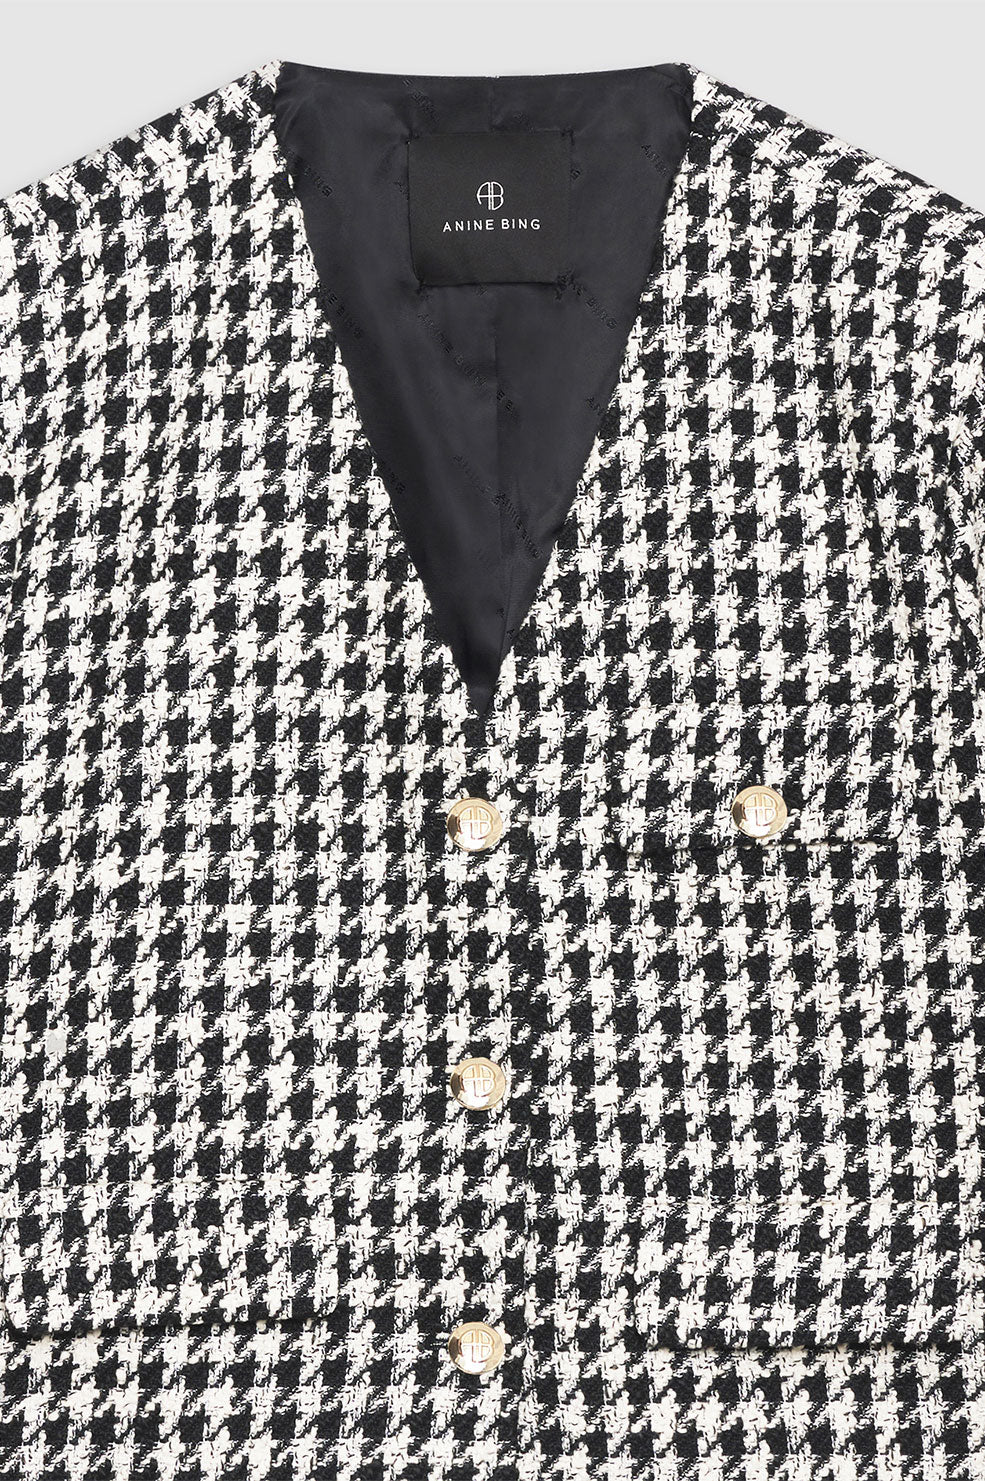 ANINE BING Cara Jacket - Cream And Black Houndstooth - Detail View